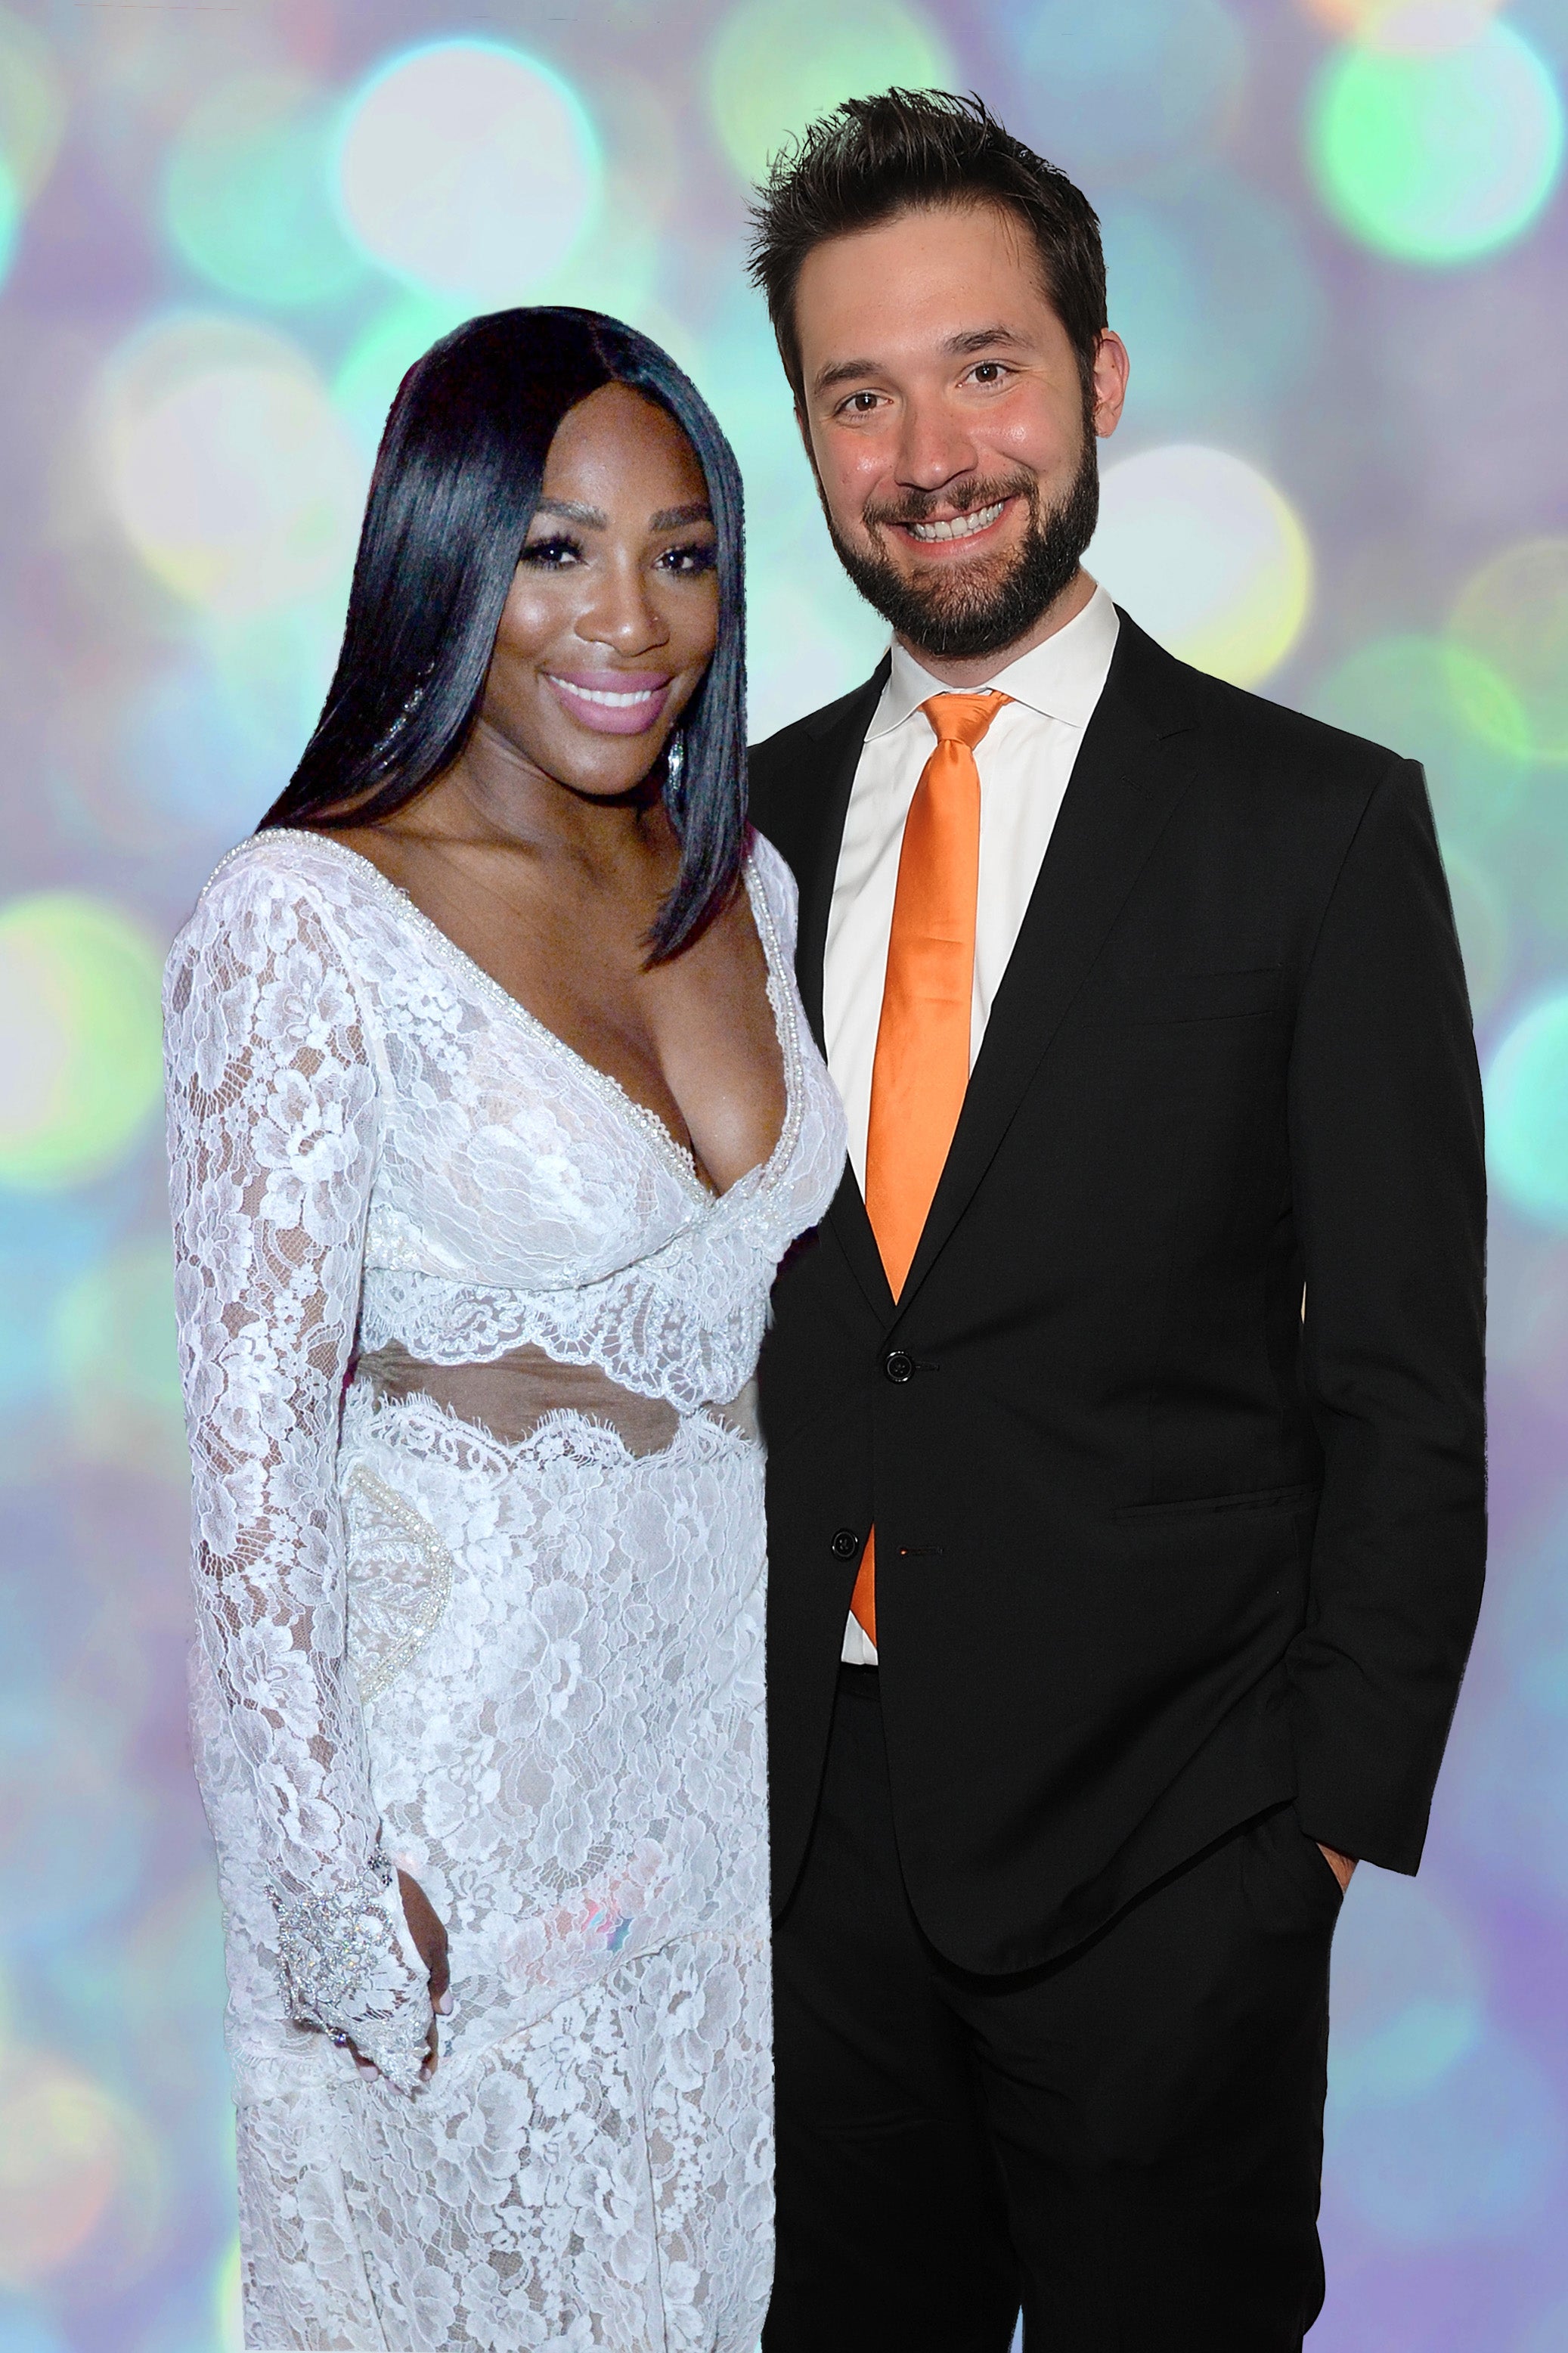 8 Things We Learned About Serena Williams And Alexis Ohanian’s Love That Will Make You Happy Cry
